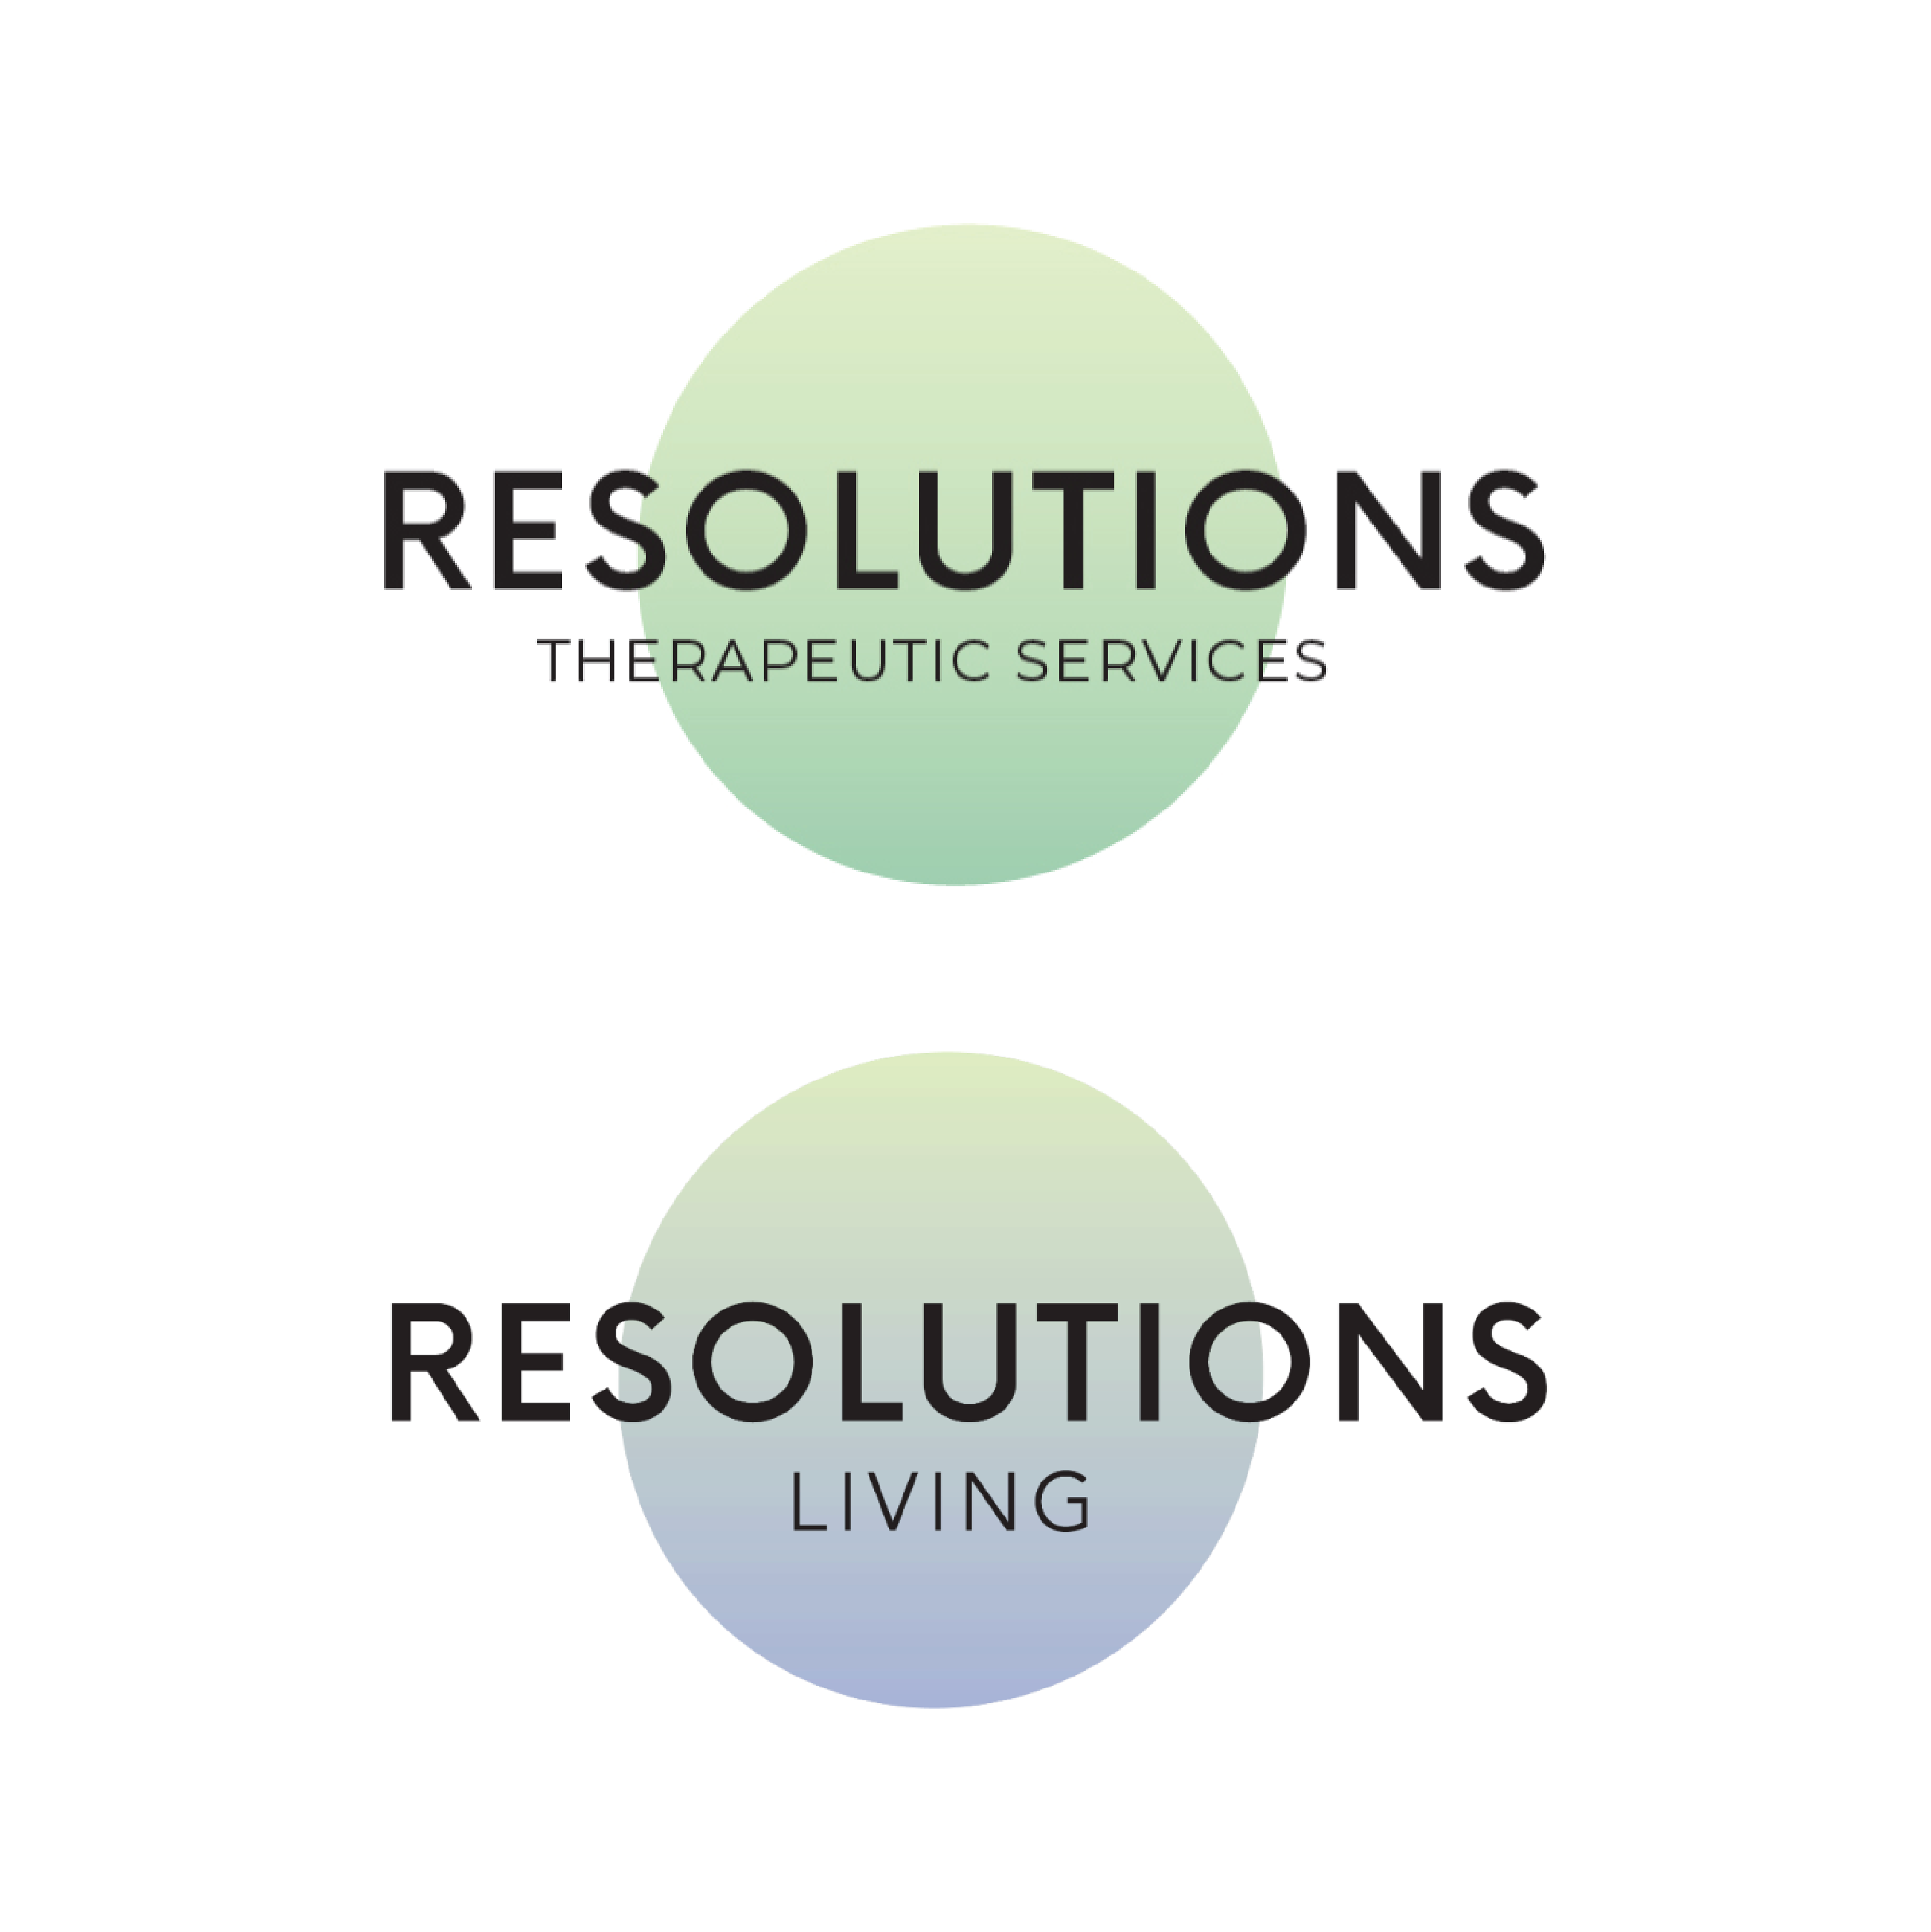 Resolutions Therapeutic Services